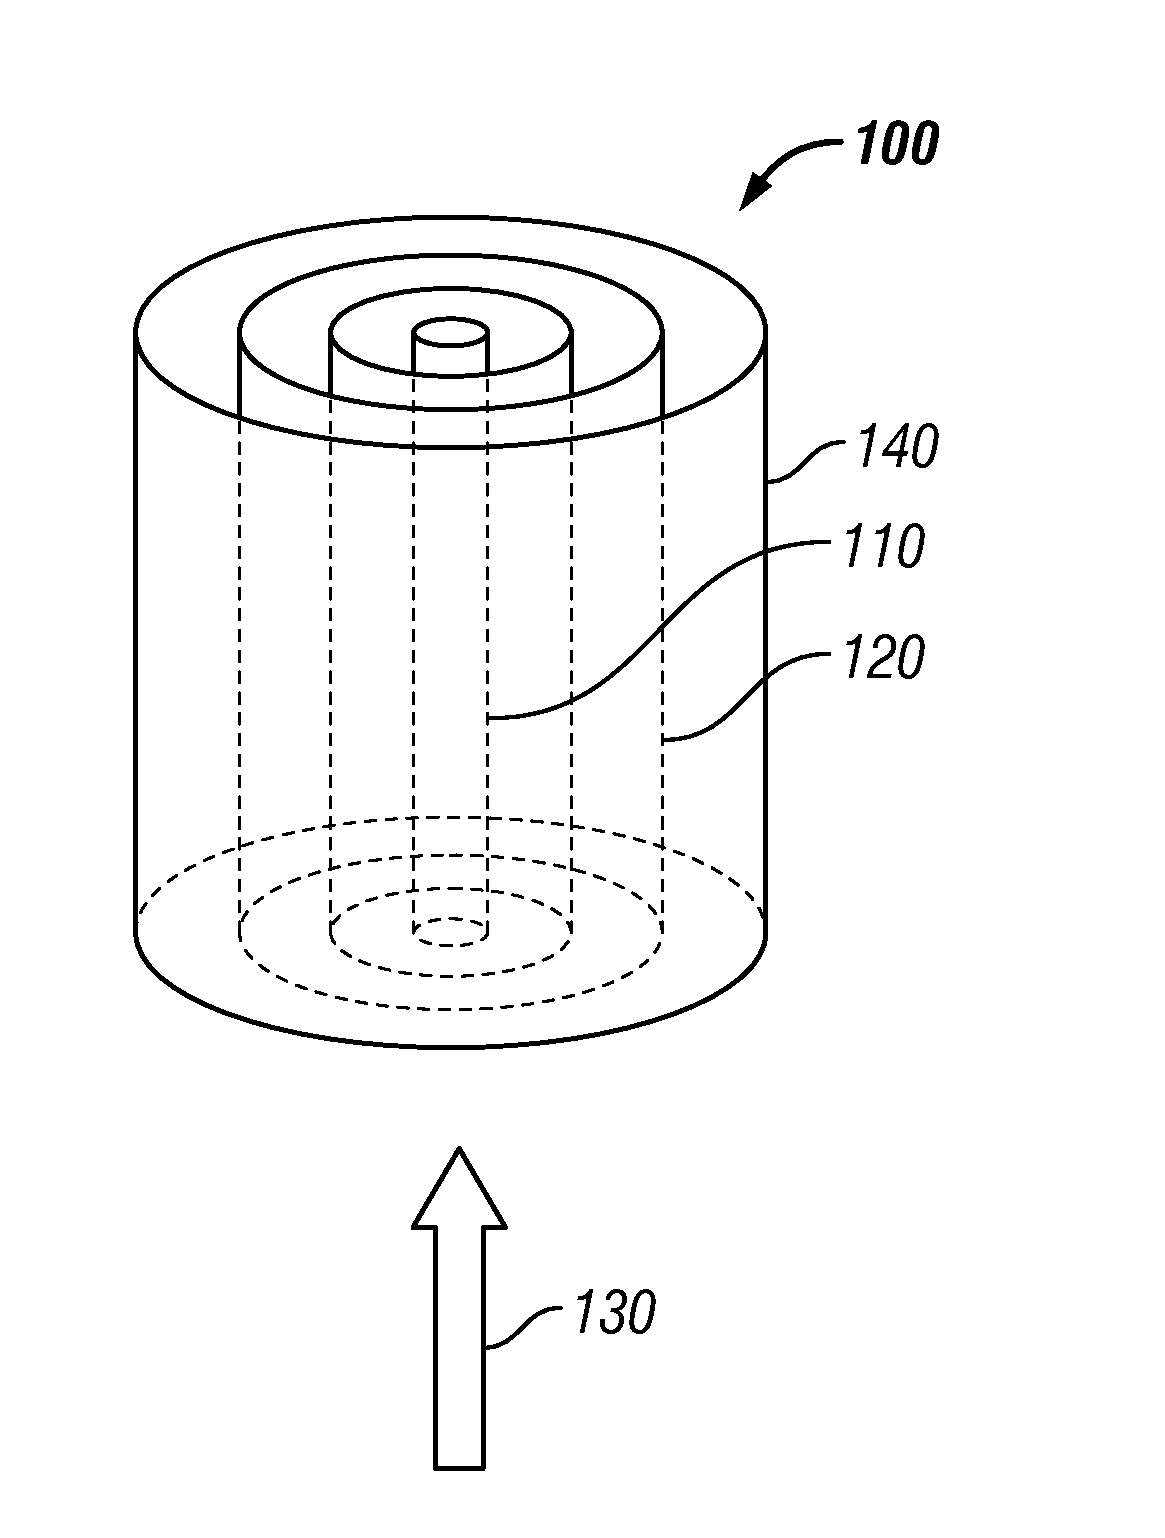 Air purification apparatus and method of forming the same